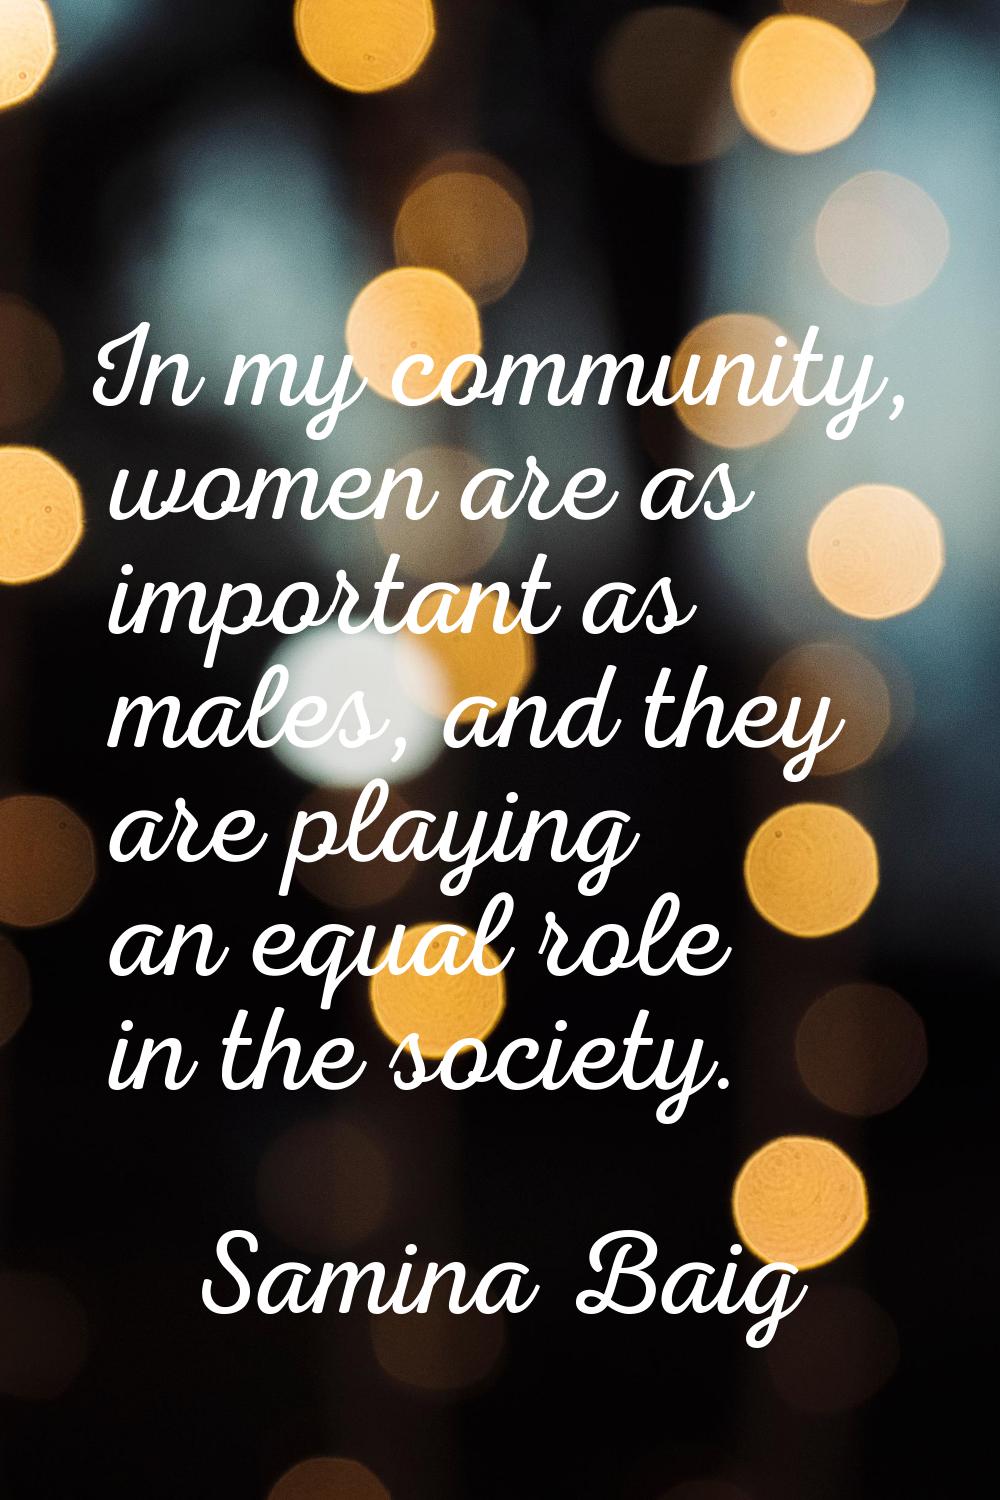 In my community, women are as important as males, and they are playing an equal role in the society